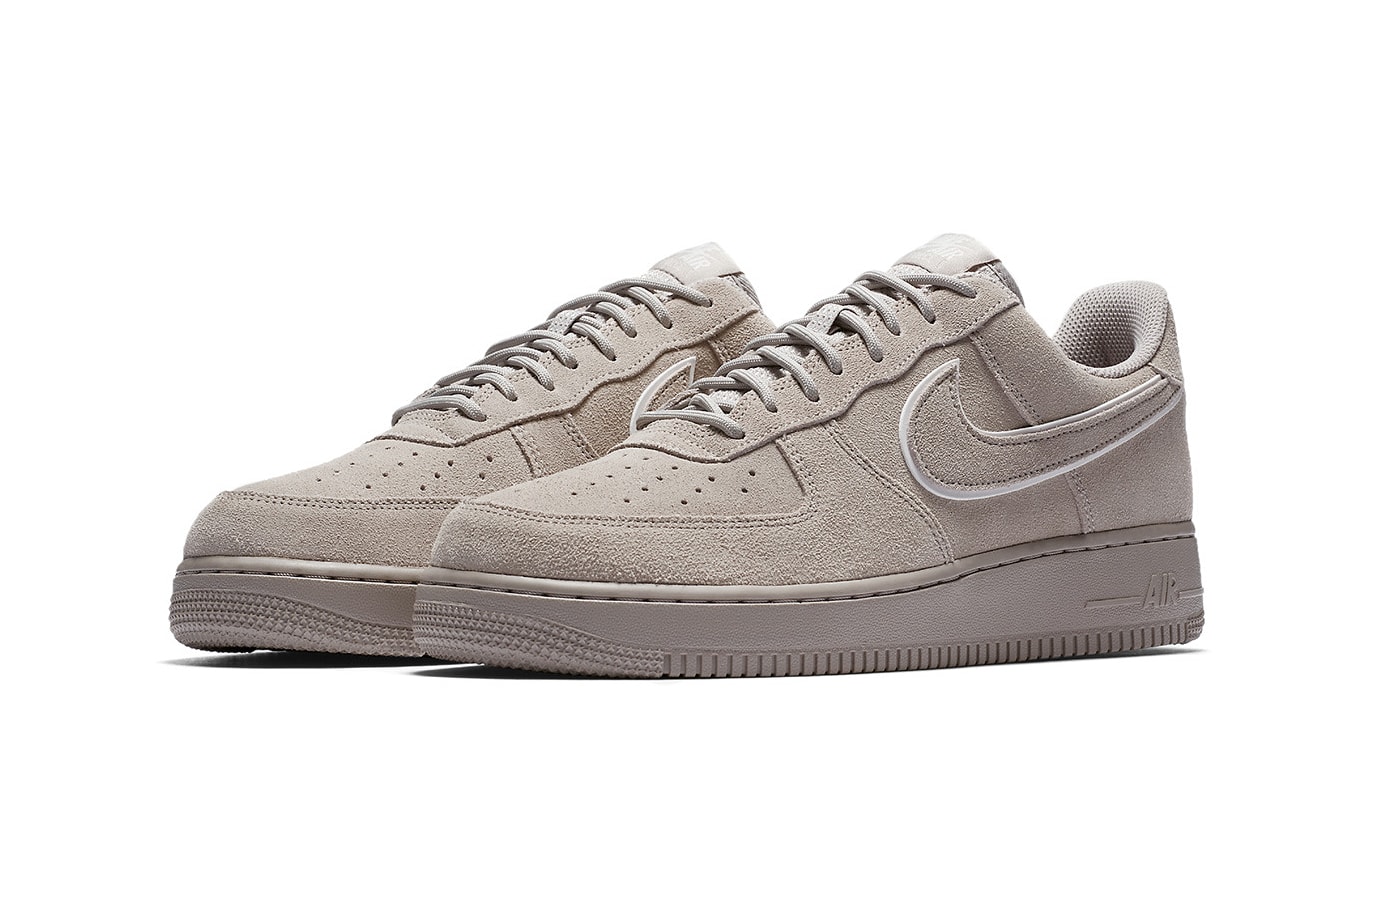 Nike air force 1 low suede pack pink turquoise blue off-white cream beige tonal sneakers womens mens unisex